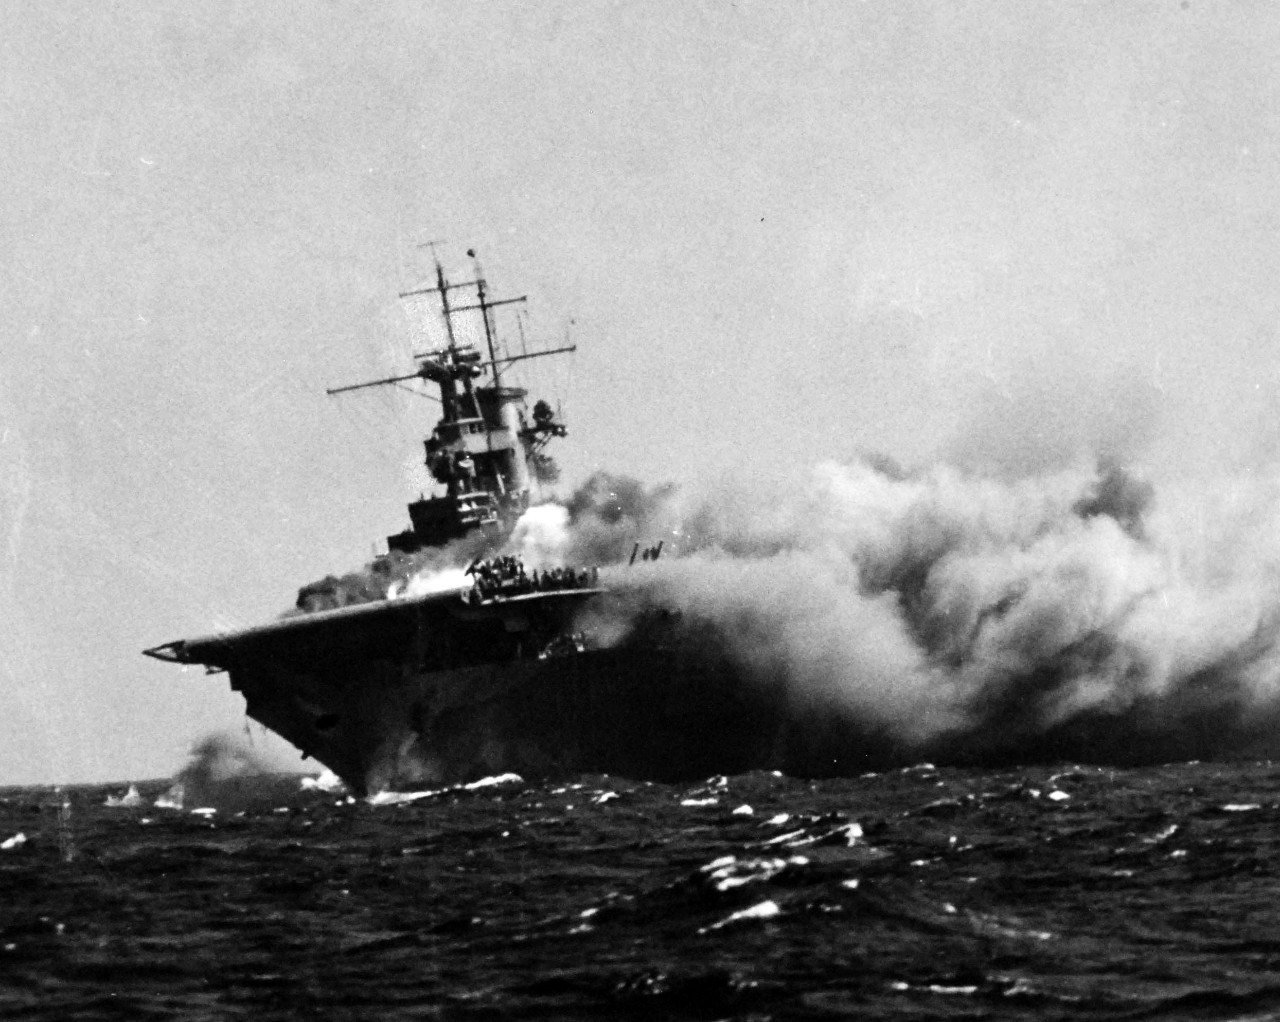 80-G-16331:   Loss of USS Wasp (CV 7), 15 September 1942.    Wasp burning and listing after being torpedoed by Japanese submarine I-19  while operating in the South Pacific supporting forces on Guadalcanal.   Official U.S. Navy Photograph, now in the collections of the U.S. Navy.    (2014/06/12).